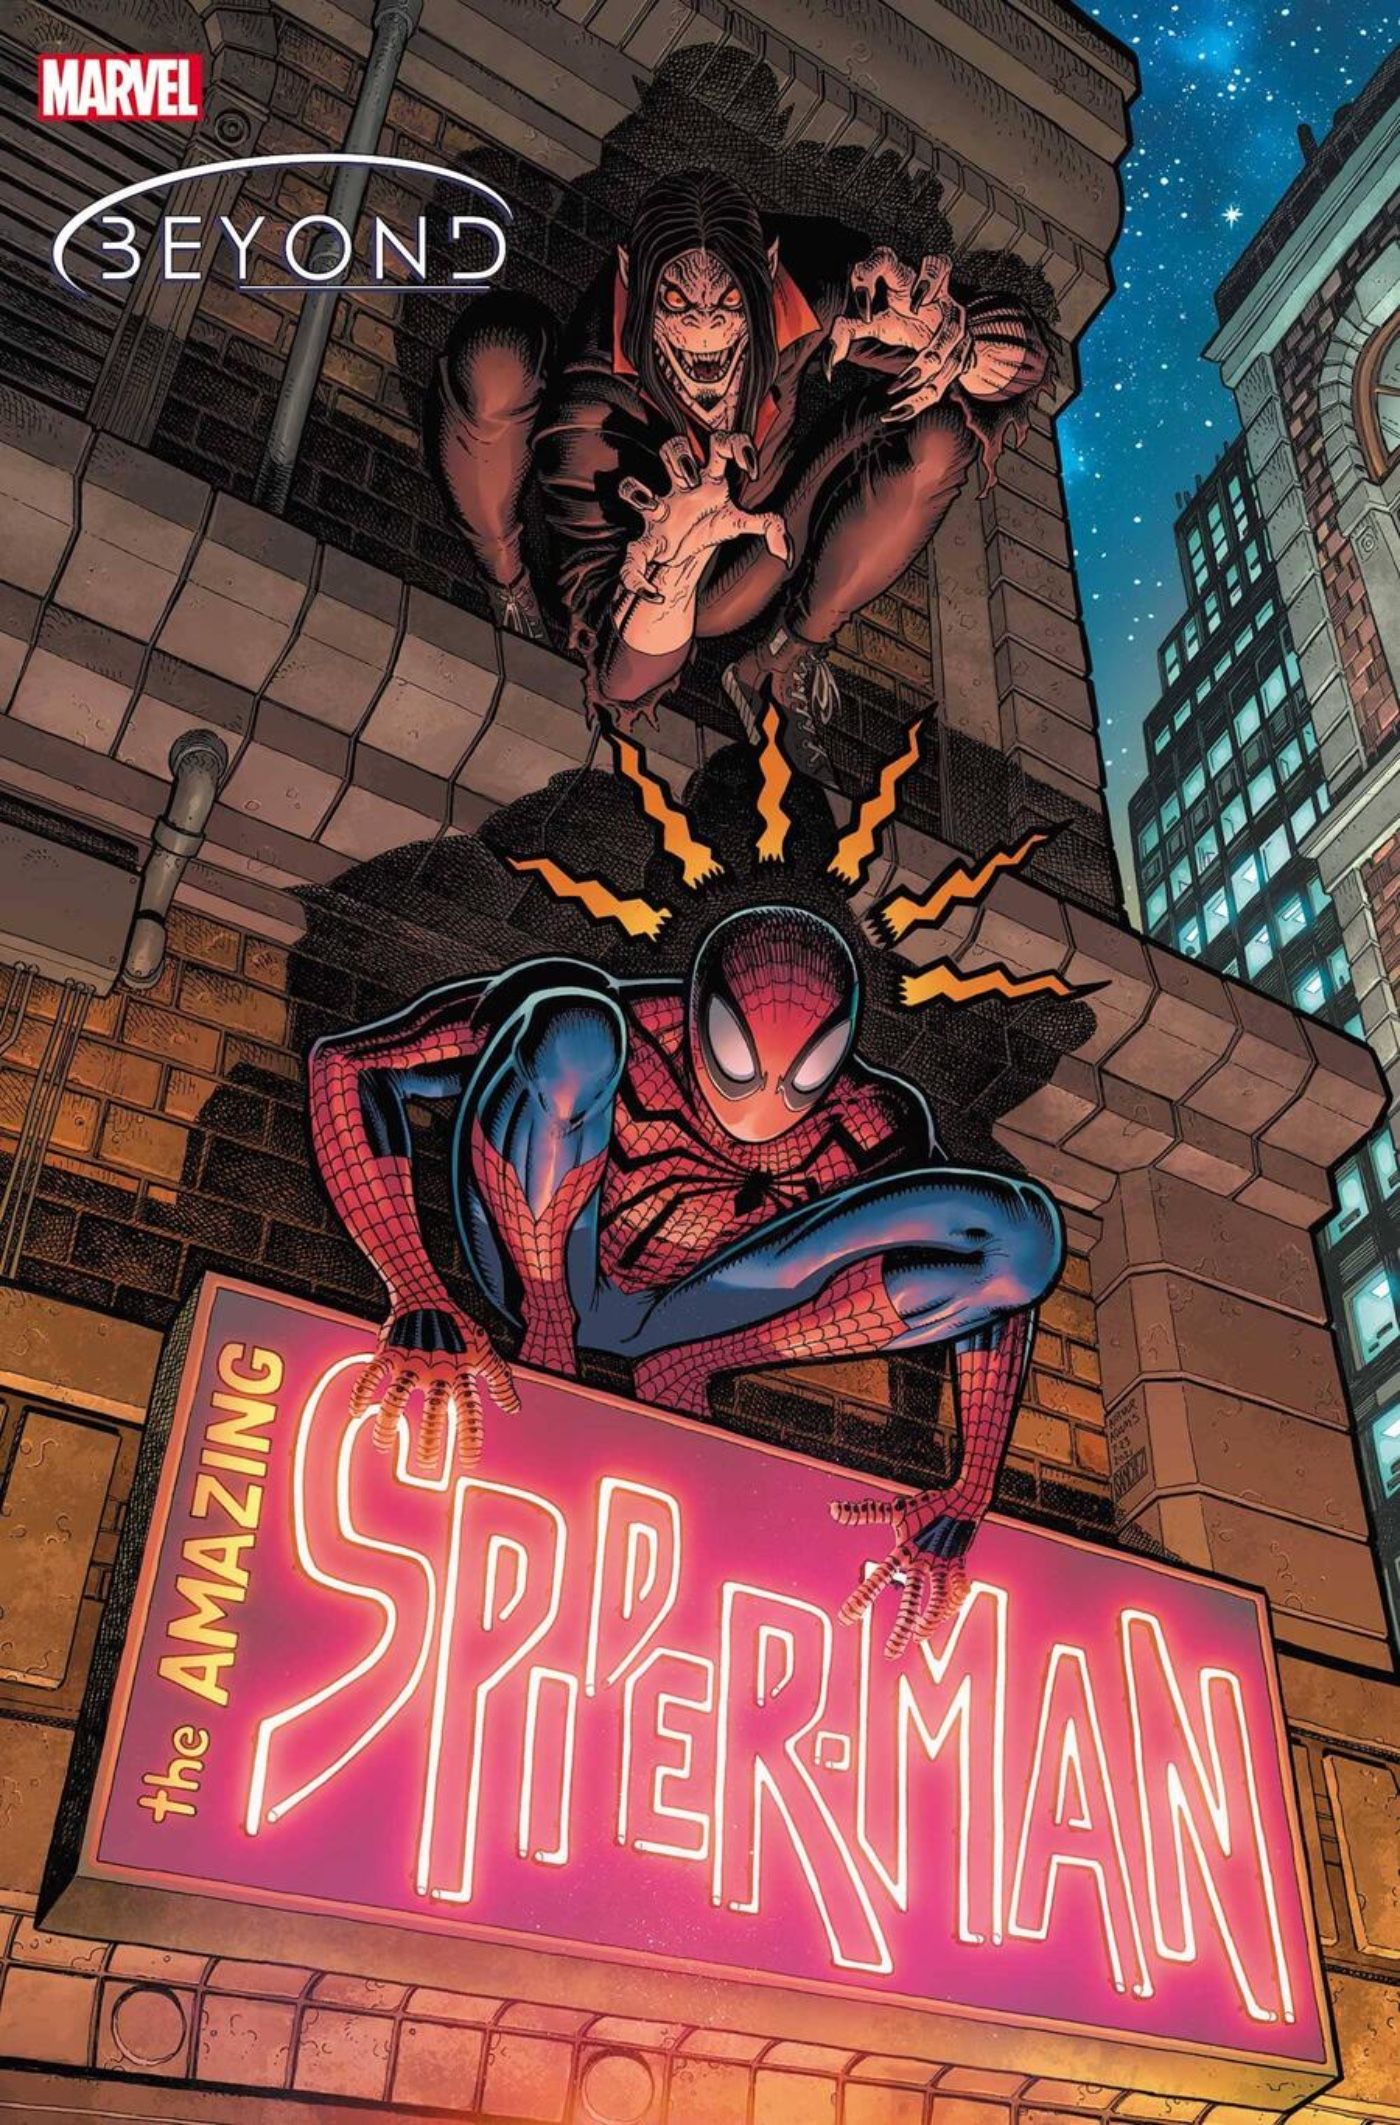 Spider-Man’s Clone Takes on Kraven and Morbius